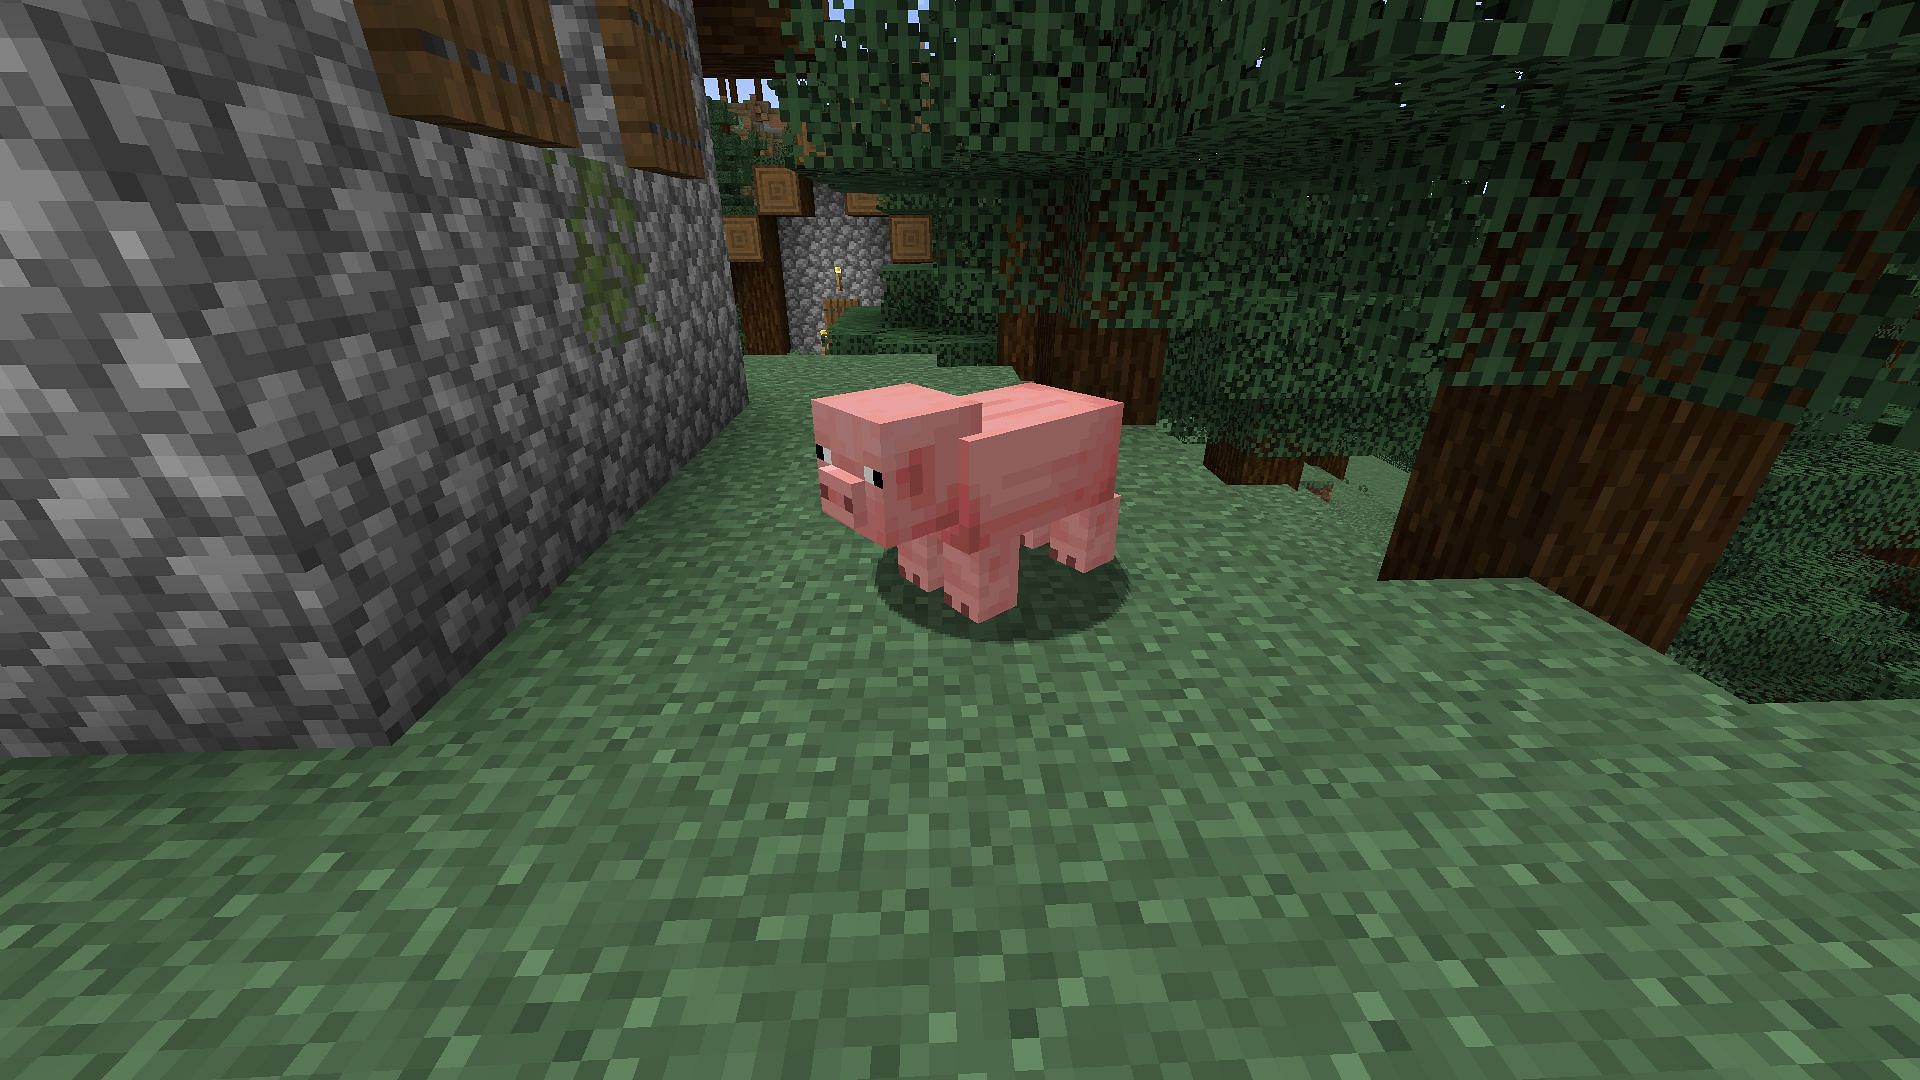 Pigs drop raw pork that can be cooked and consumed in Minecraft (Image via Mojang)